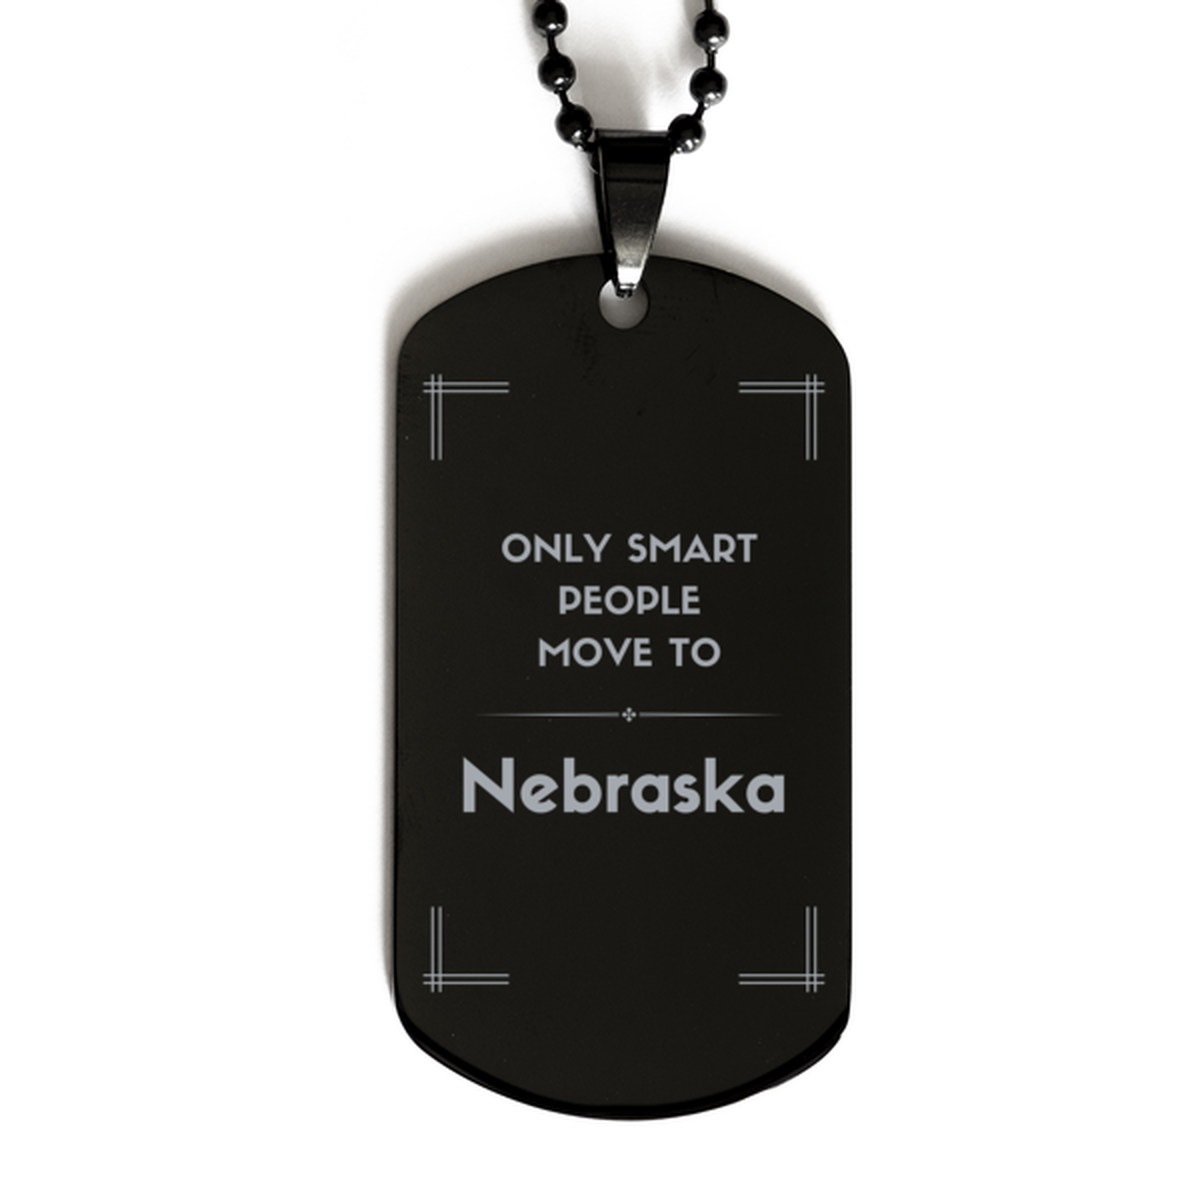 Only smart people move to Nebraska Black Dog Tag, Gag Gifts For Nebraska, Move to Nebraska Gifts for Friends Coworker Funny Saying Quote